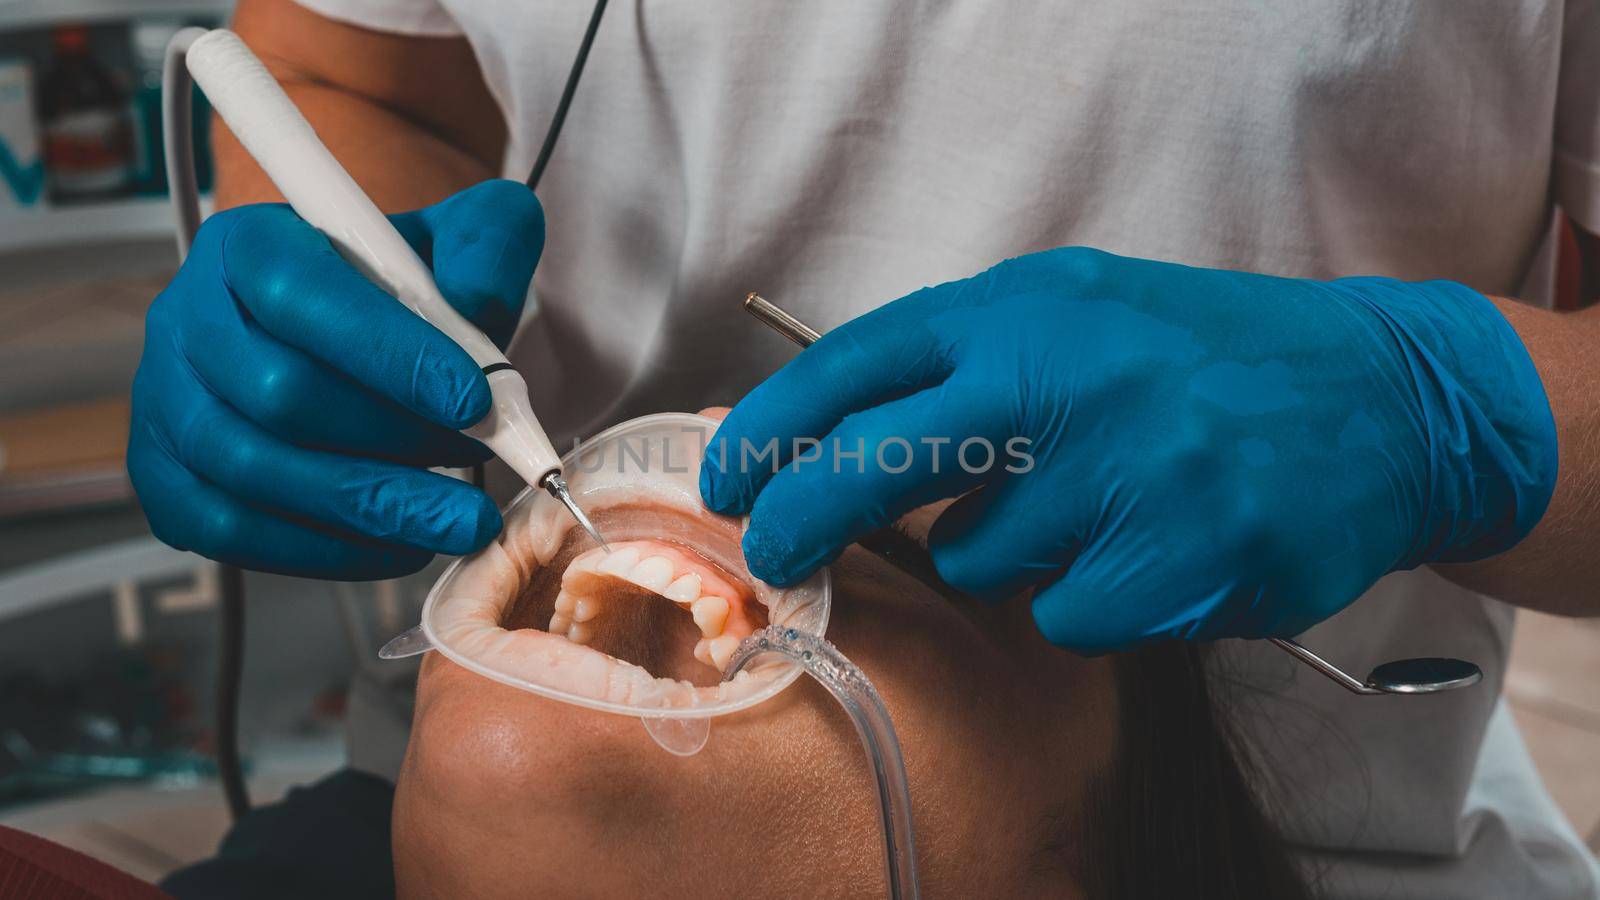 At the dentist's appointment, tartar removal, use of ultrasound, patient and dentist. Retractor for isolation of lips and gums. 2020